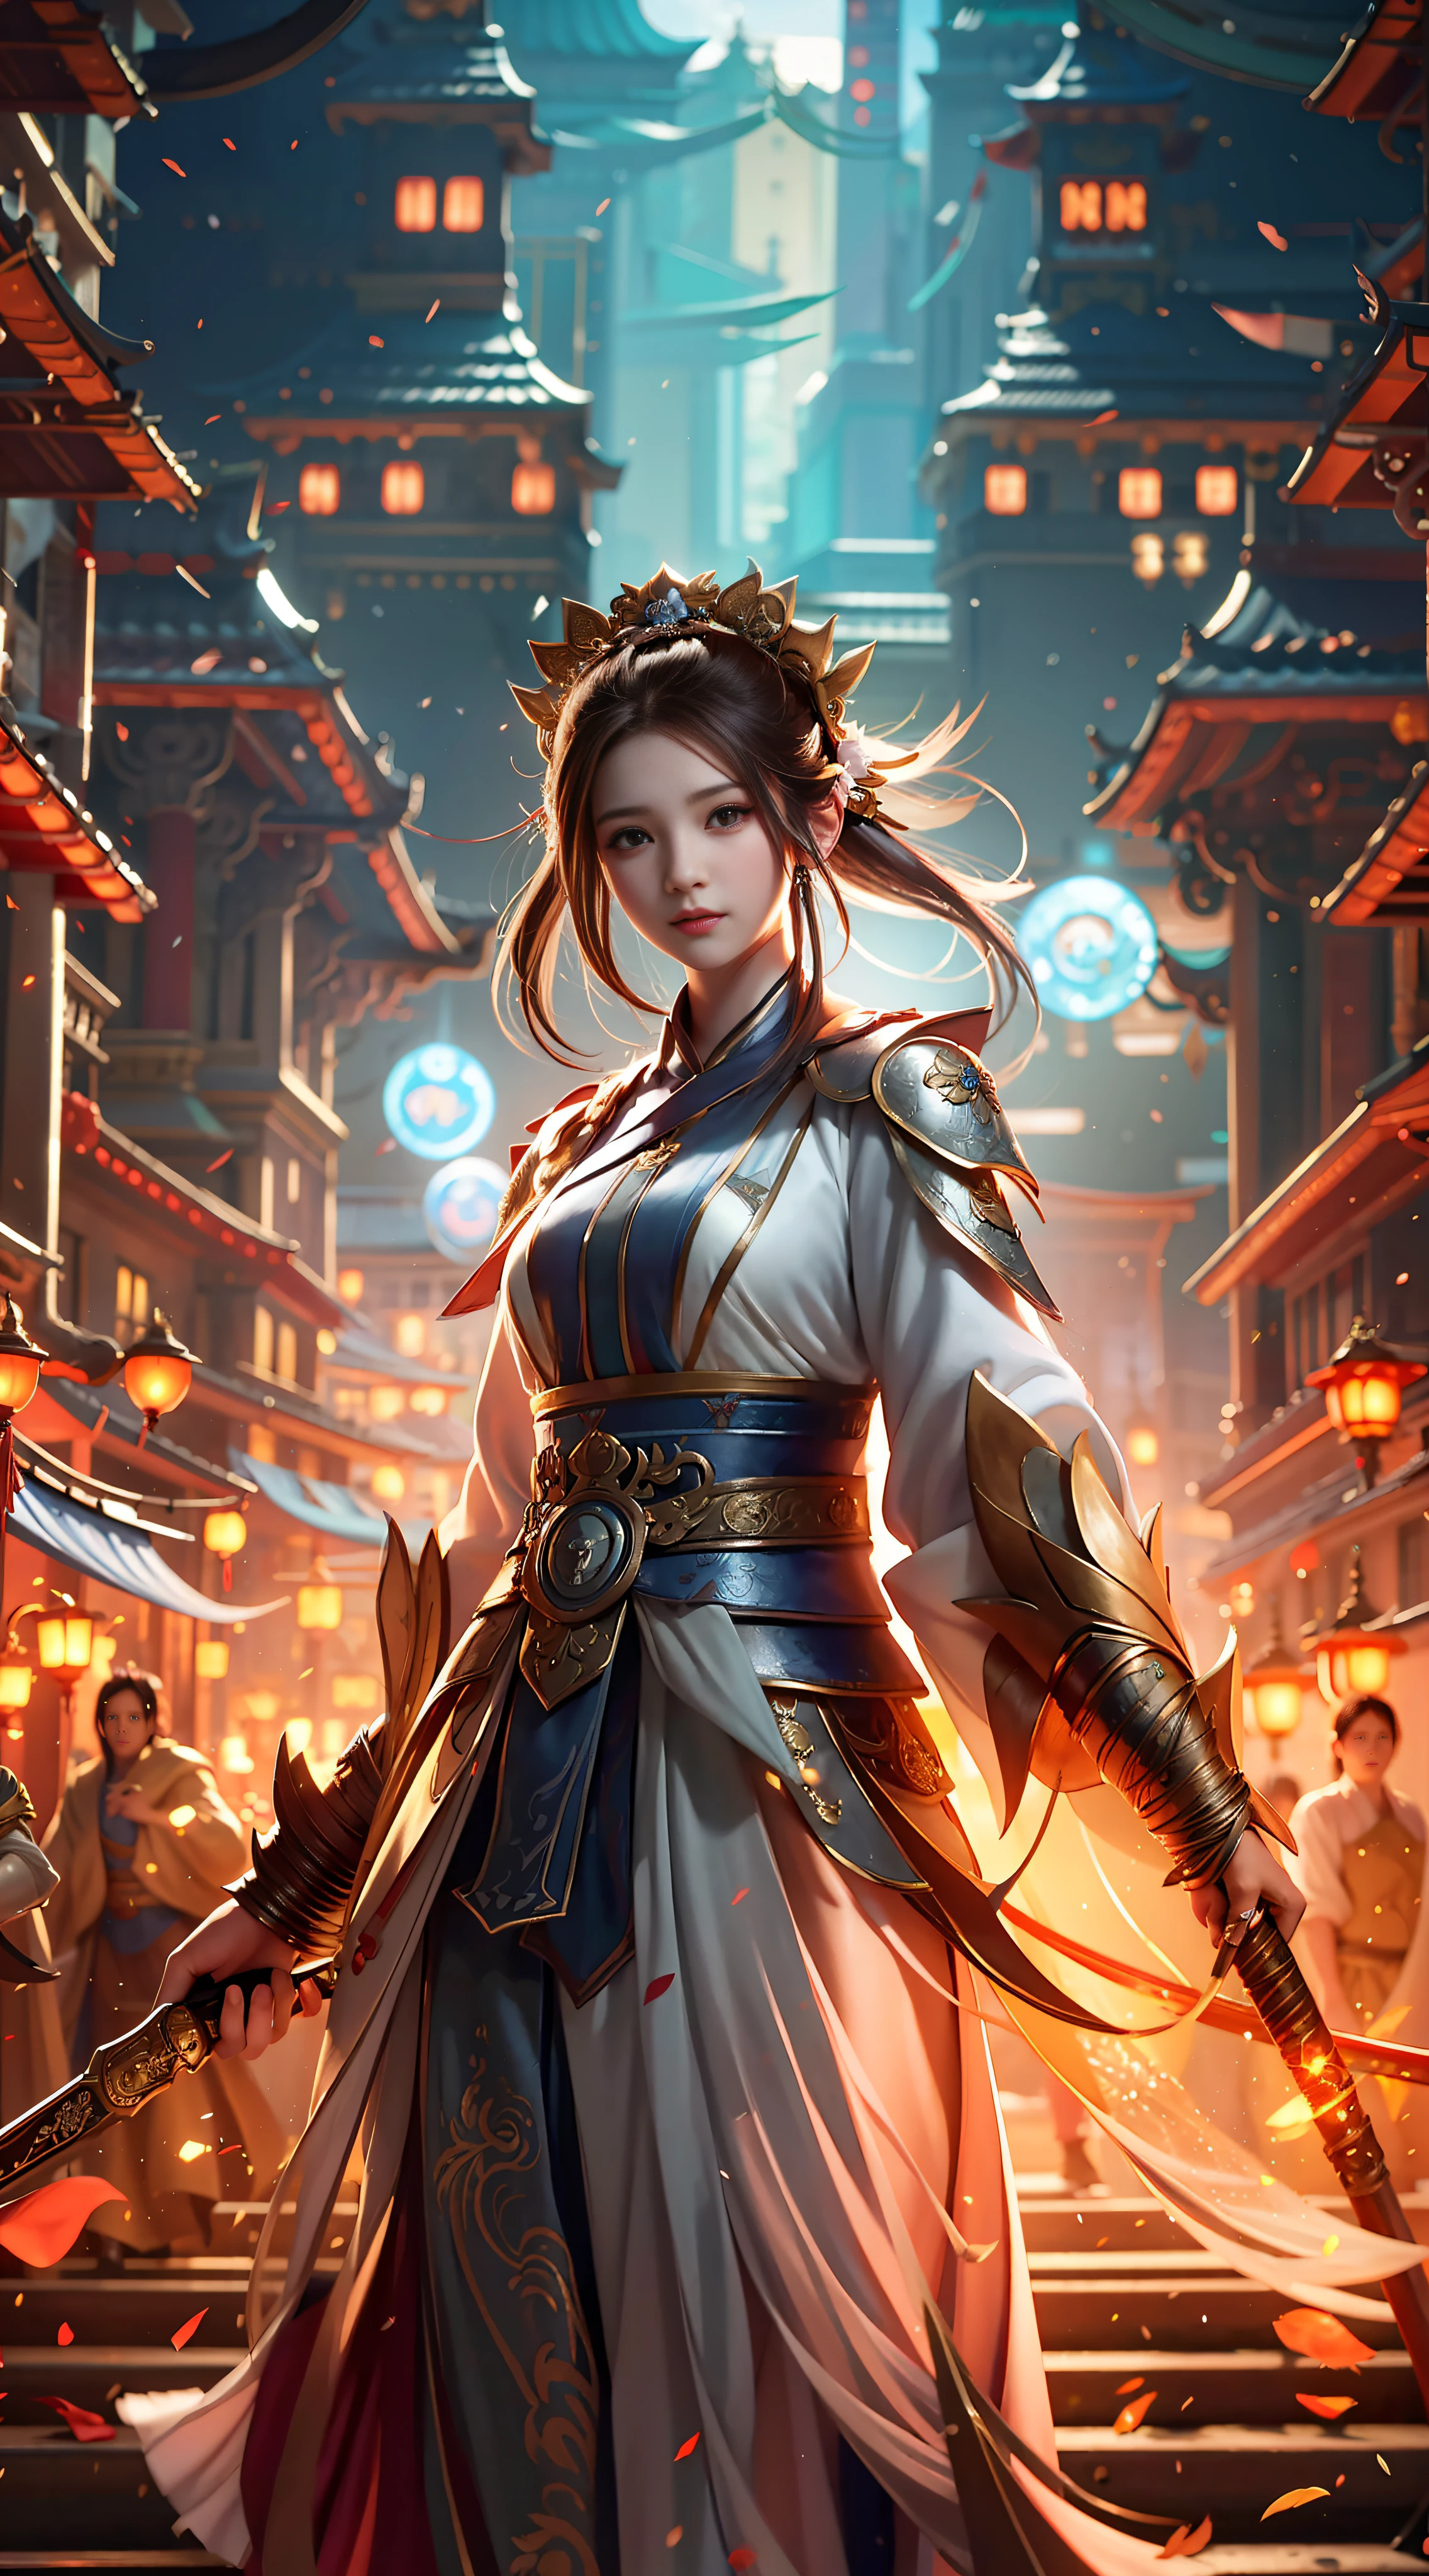 a woman in a long dress holding a sword in a city, alice x. zhang, by Yang J, chengwei pan on artstation, cgsociety and fenghua zhong, by Victor Wang, [ trending on cgsociety ]!!, inspired by Feng Zhu, dawn cgsociety, by Jeremy Chong, inspired by Fenghua Zhong, by Zhou Fang